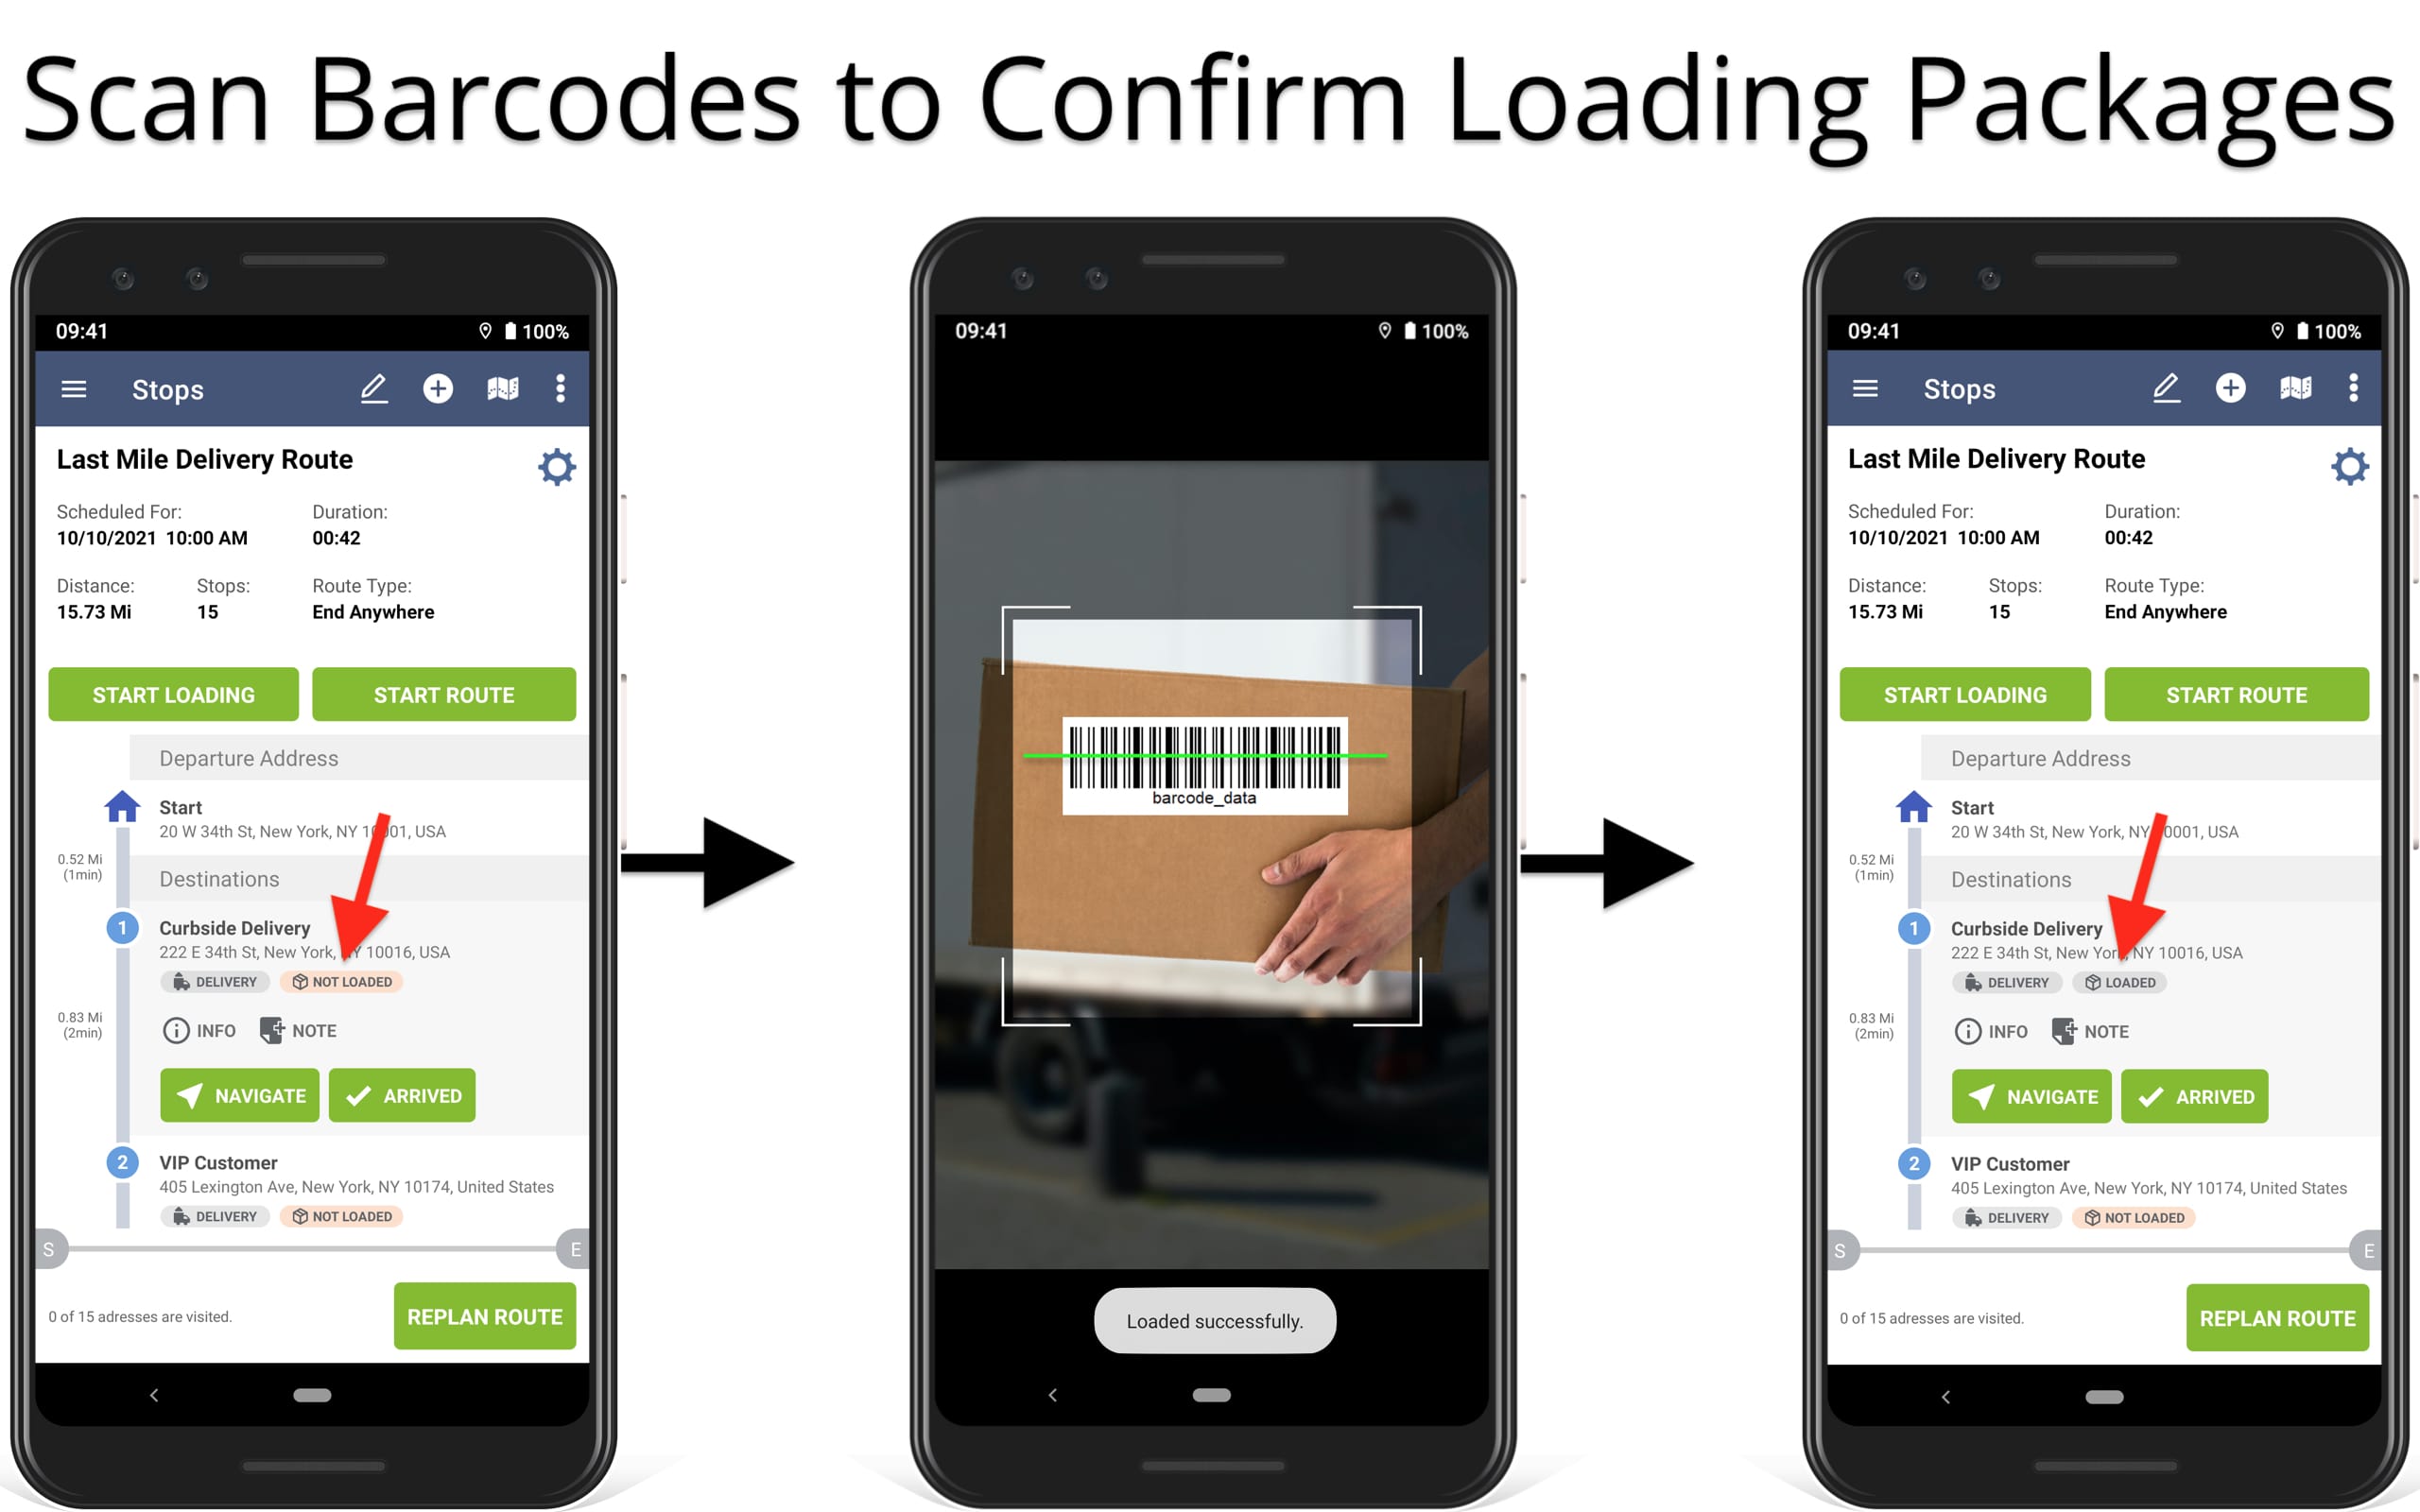 Mandatory barcode reconciliation for scanning labels to confirm loading packages.